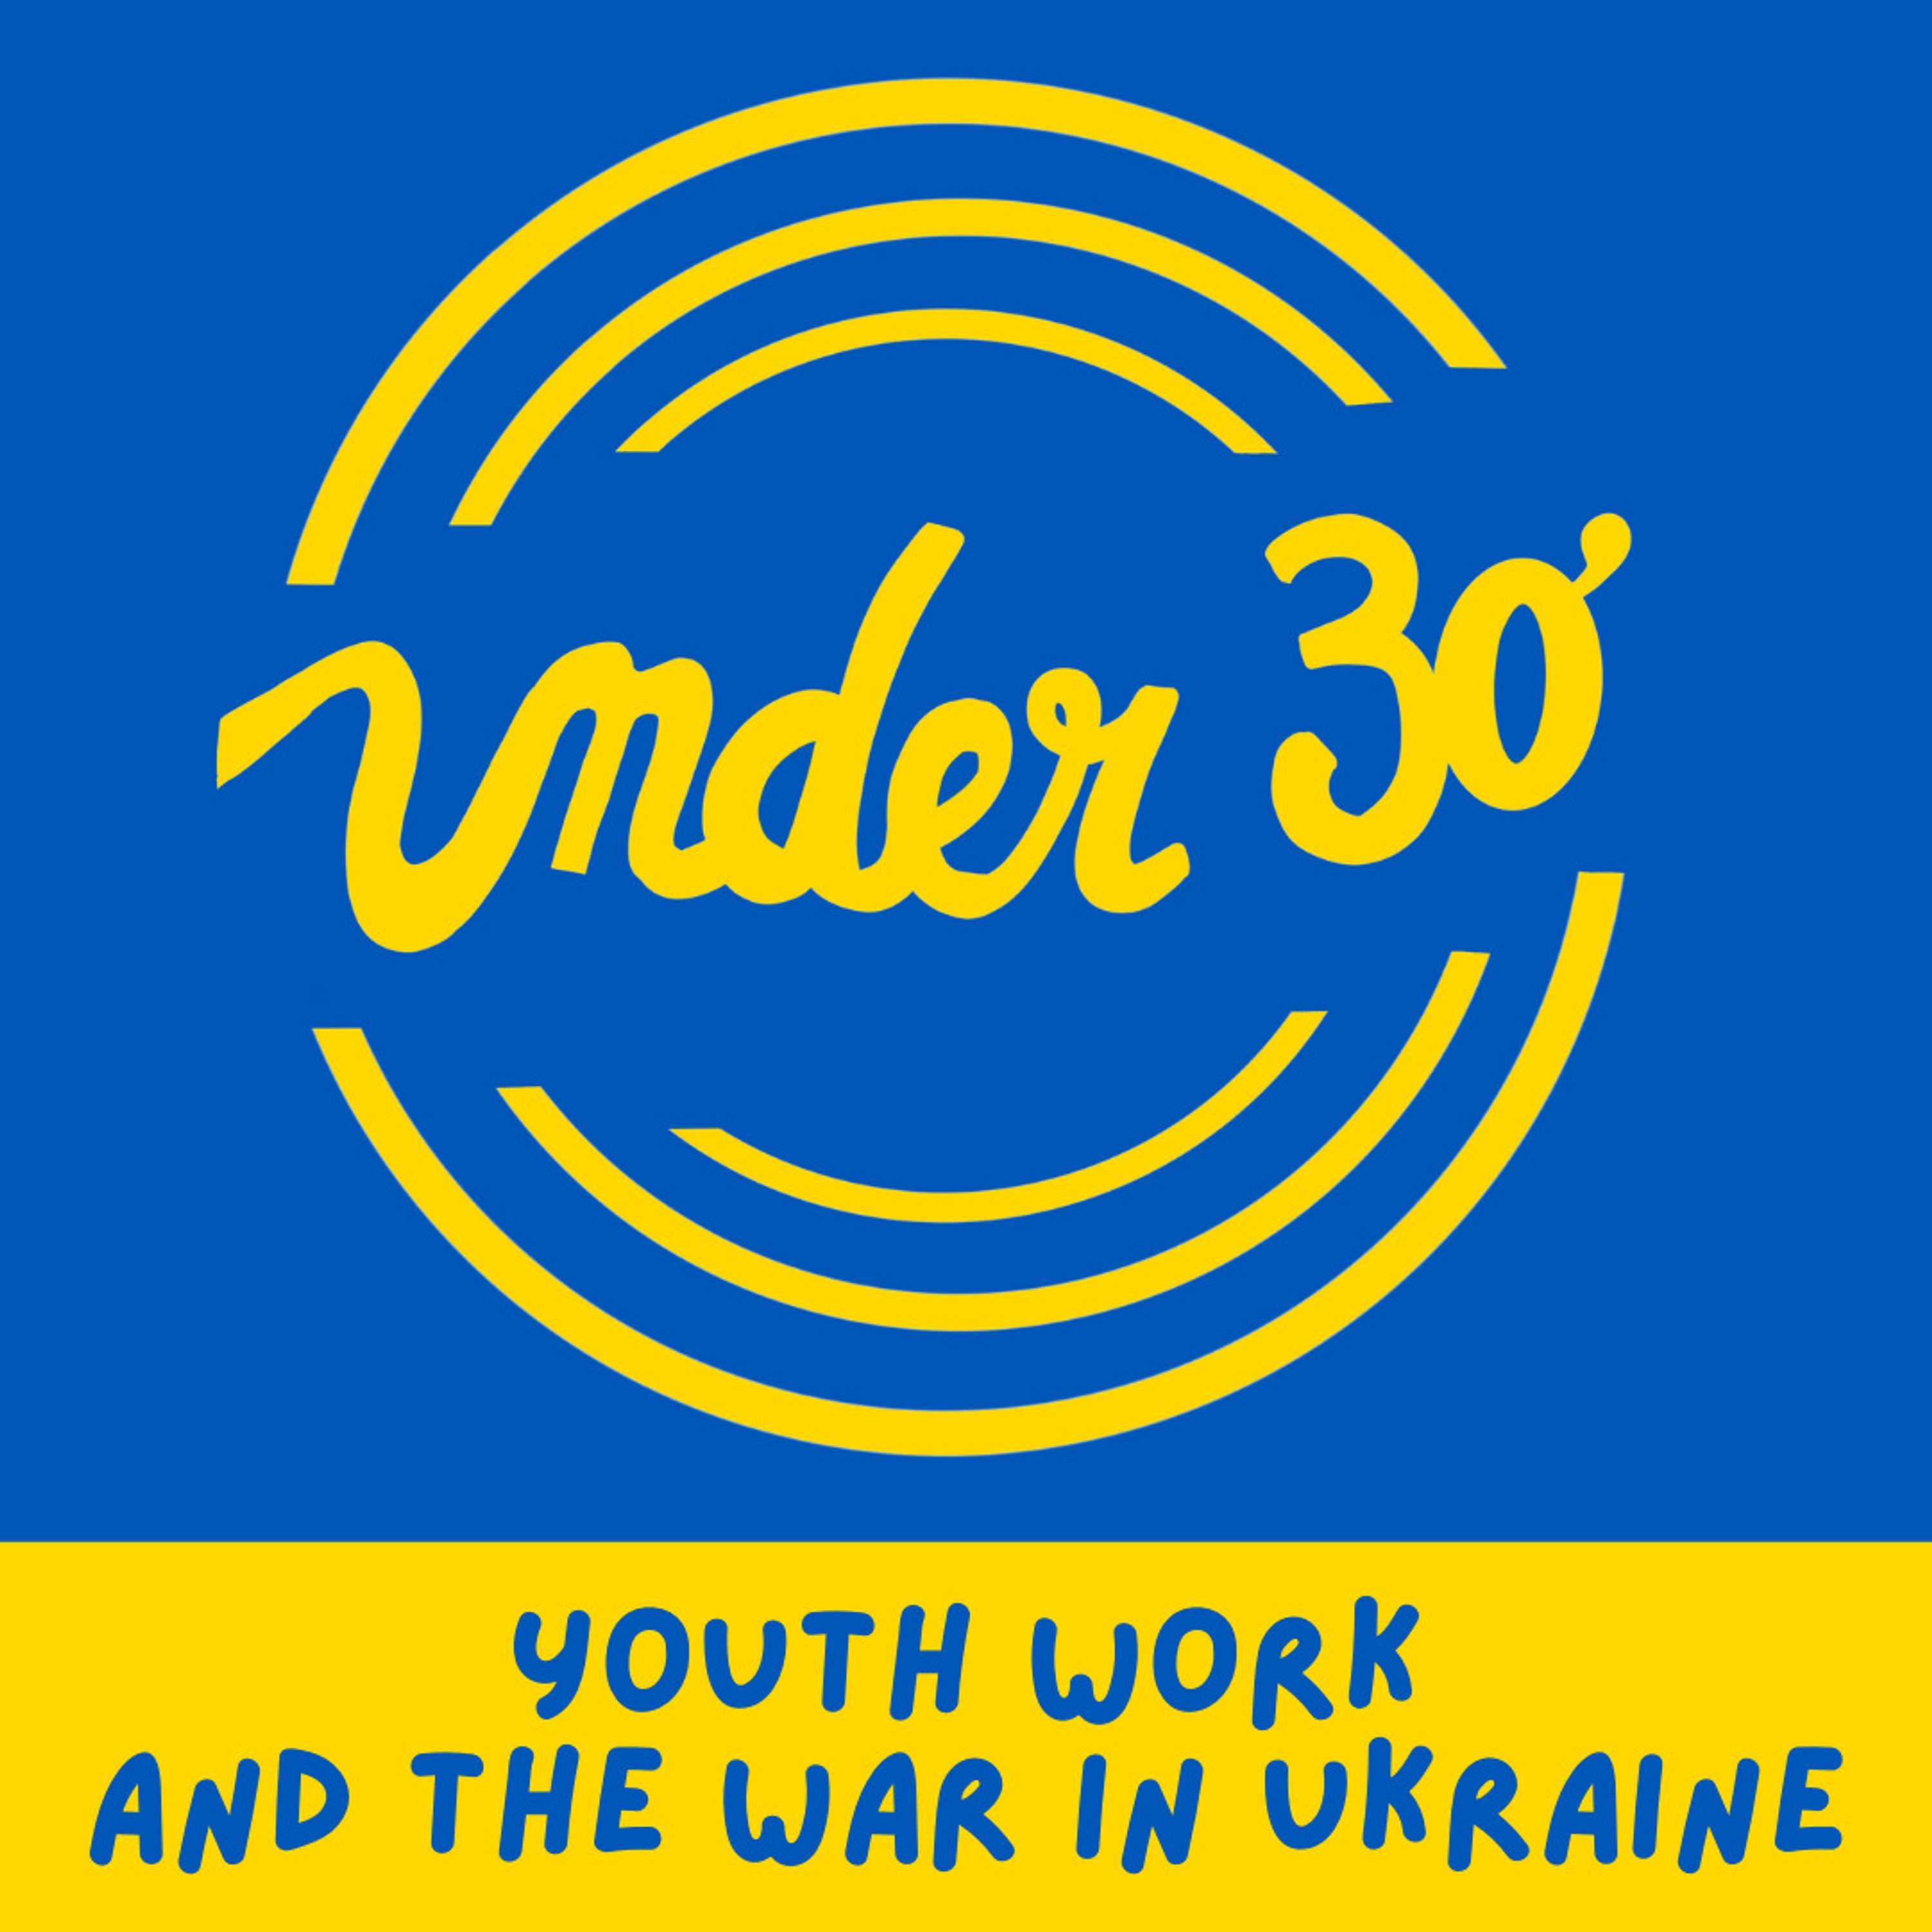 Youth work and the war in Ukraine